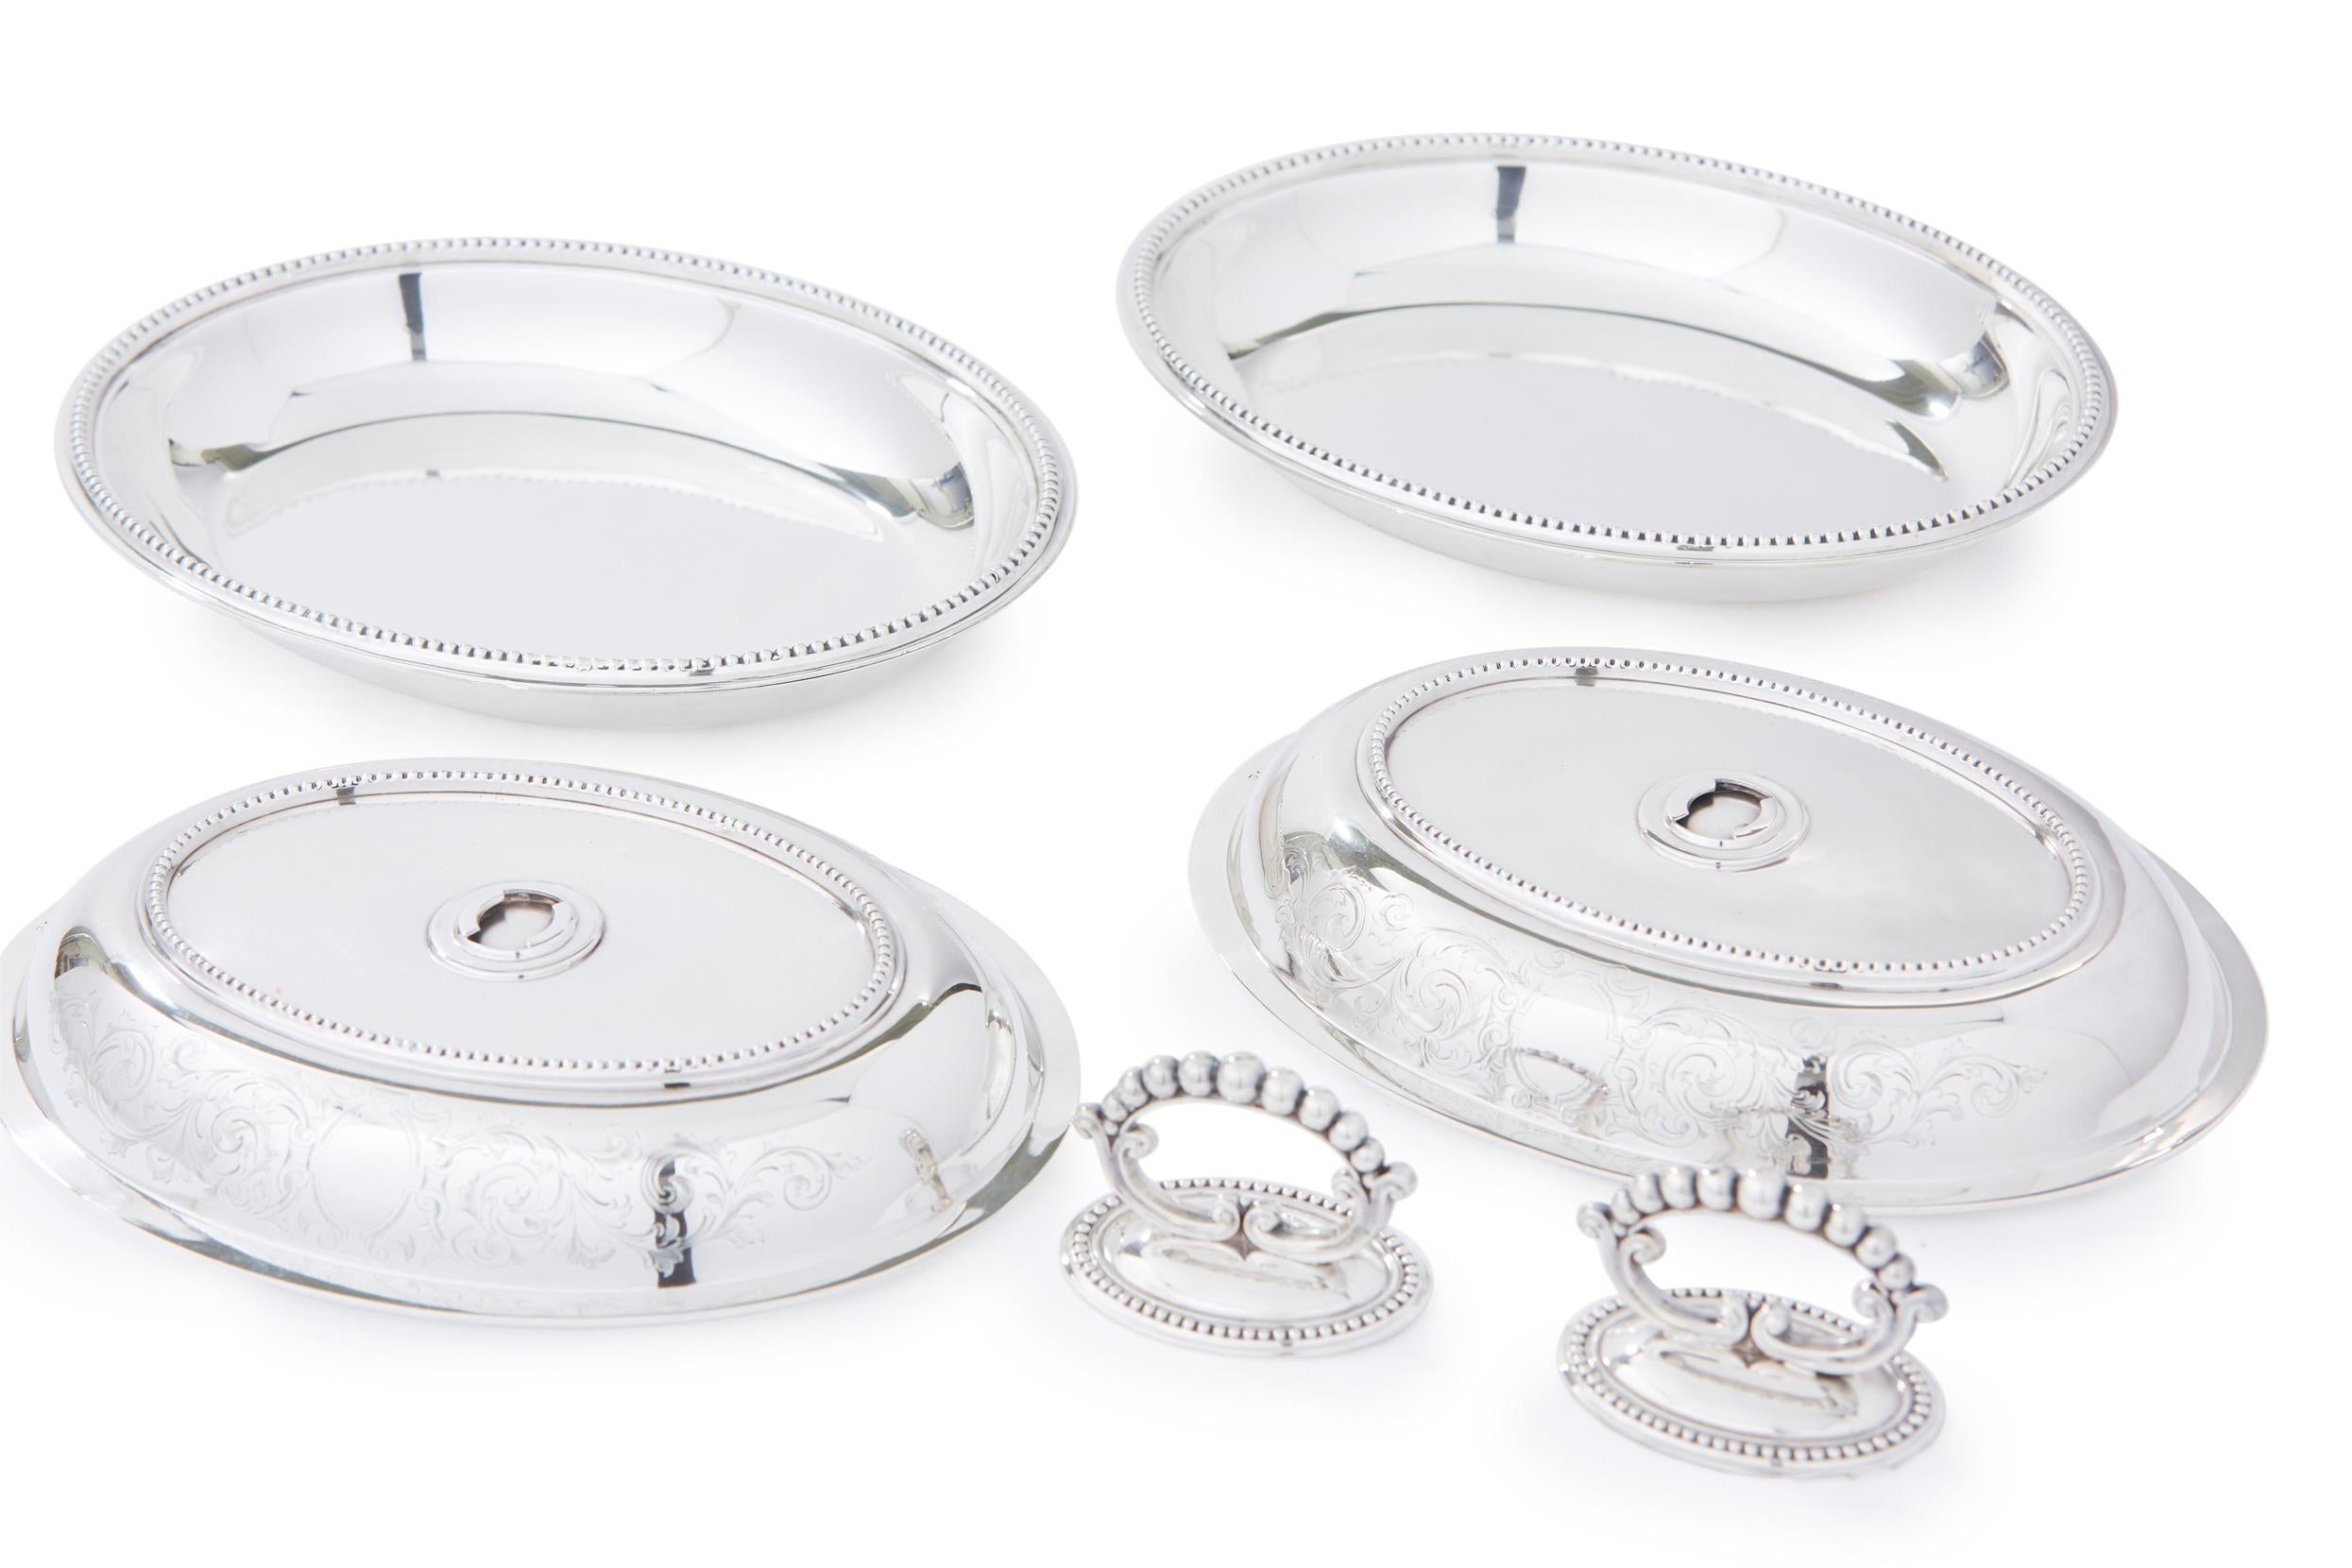 English silver plate pair of oval shape covered entrée dishes with detachable top handles with exterior cast bead borders and floral design detail. The reversible tops can be used as separate open dishes. Great condition with minor wear. Maker's